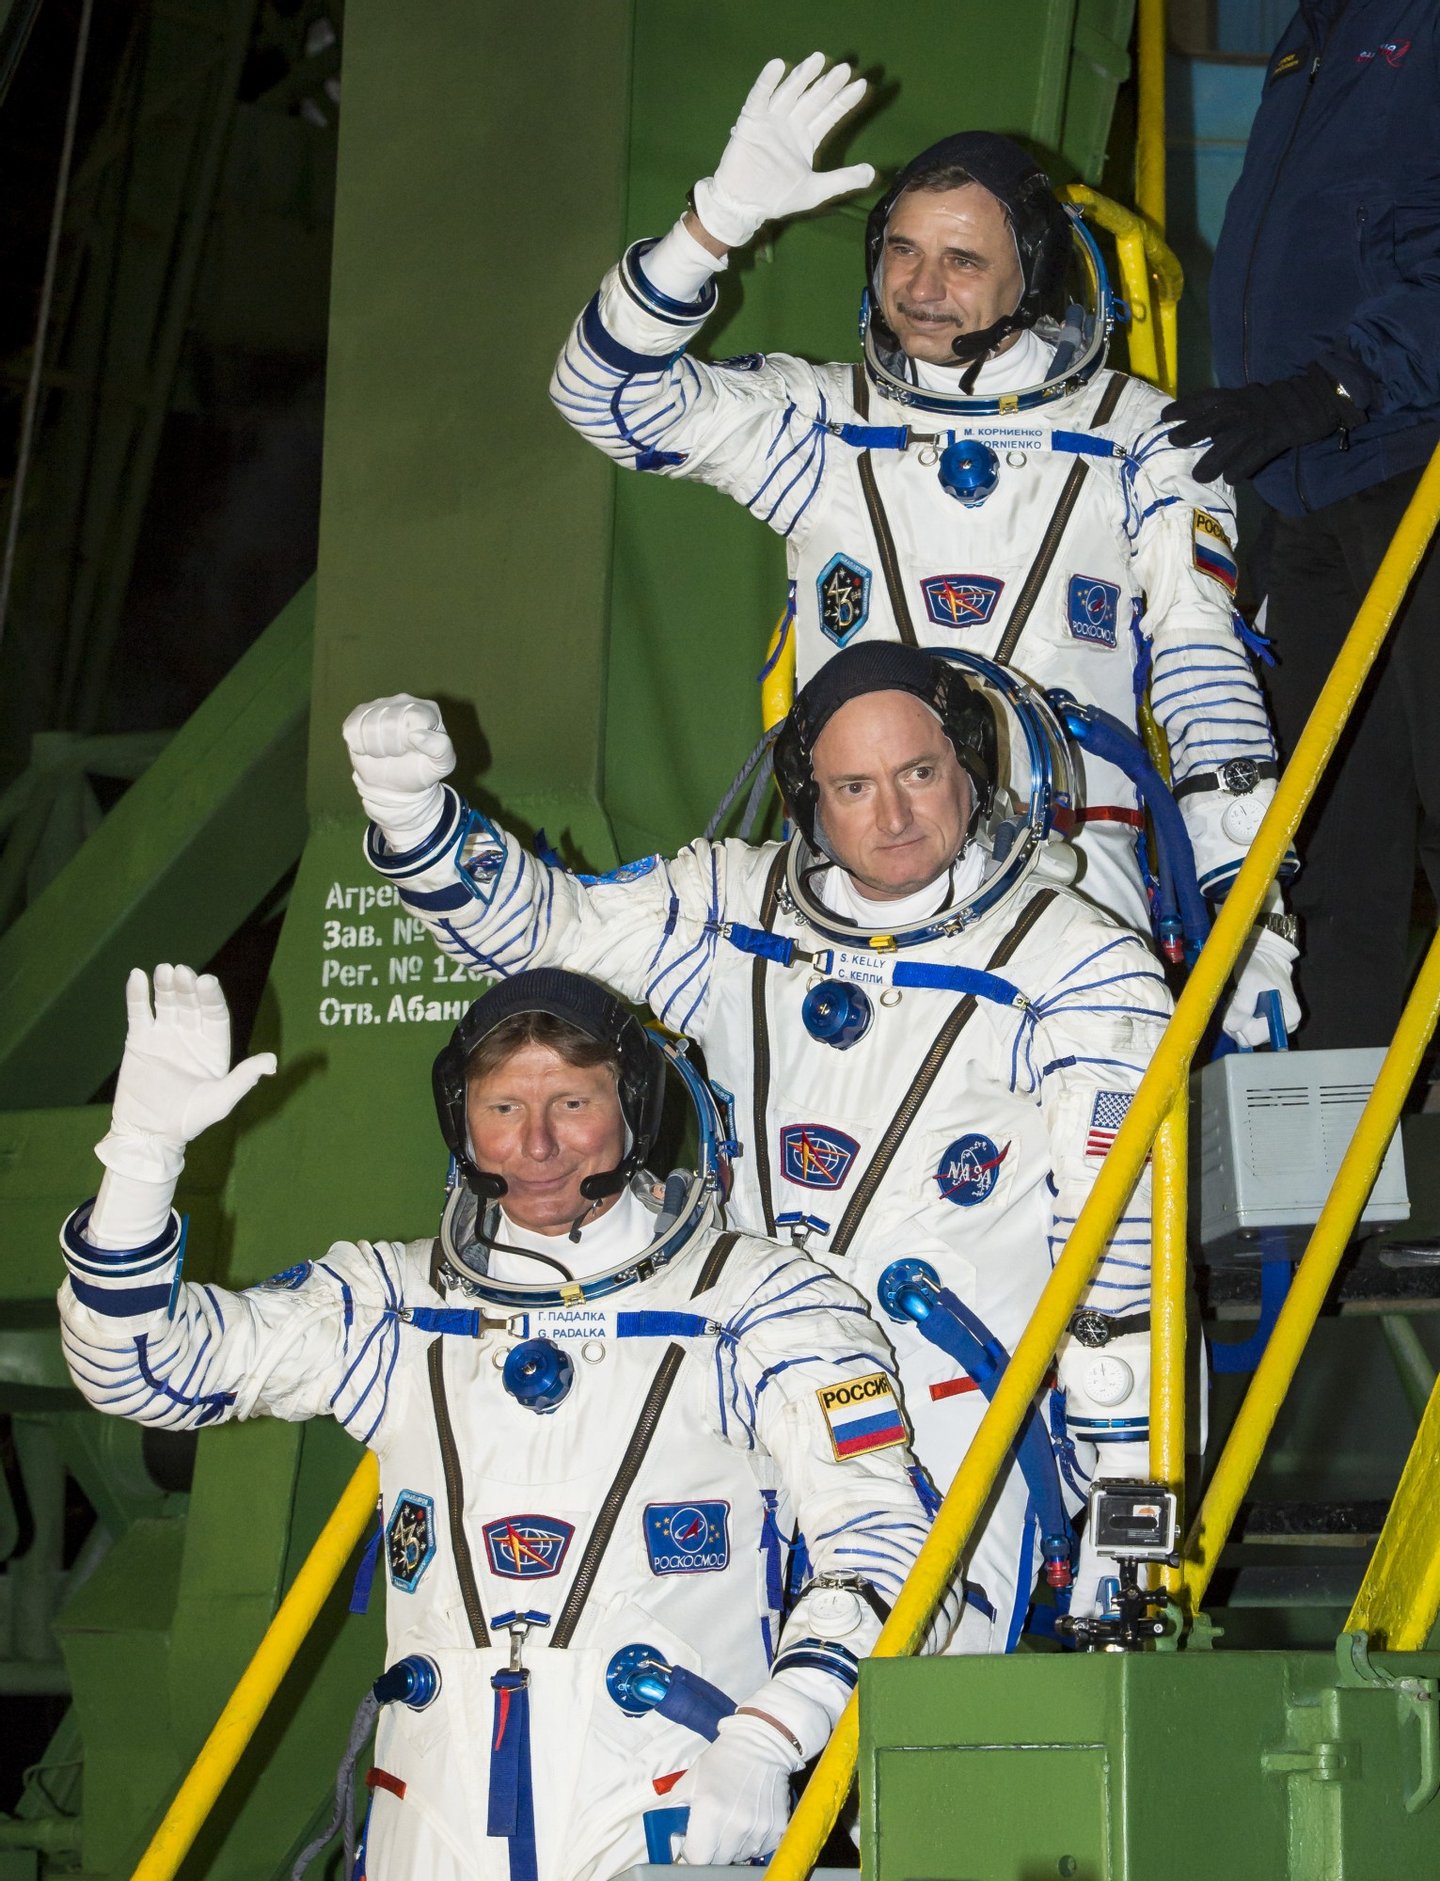 Expedition 43 Russian Cosmonaut Mikhail Kornienko of the Russian Federal Space Agency (Roscosmos), top, NASA Astronaut Scott Kelly, center, and Russian Cosmonaut Gennady Padalka of Roscosmos wave farewell as they board the Soyuz TMA-16M spacecraft ahead of their launch to the International Space Station, Friday, March 27, 2015 in Baikonor, Kazakhstan. As the one-year crew, Kelly and Kornienko will return to Earth on Soyuz TMA-18M in March 2016. Photo Credit (NASA/Bill Ingalls)